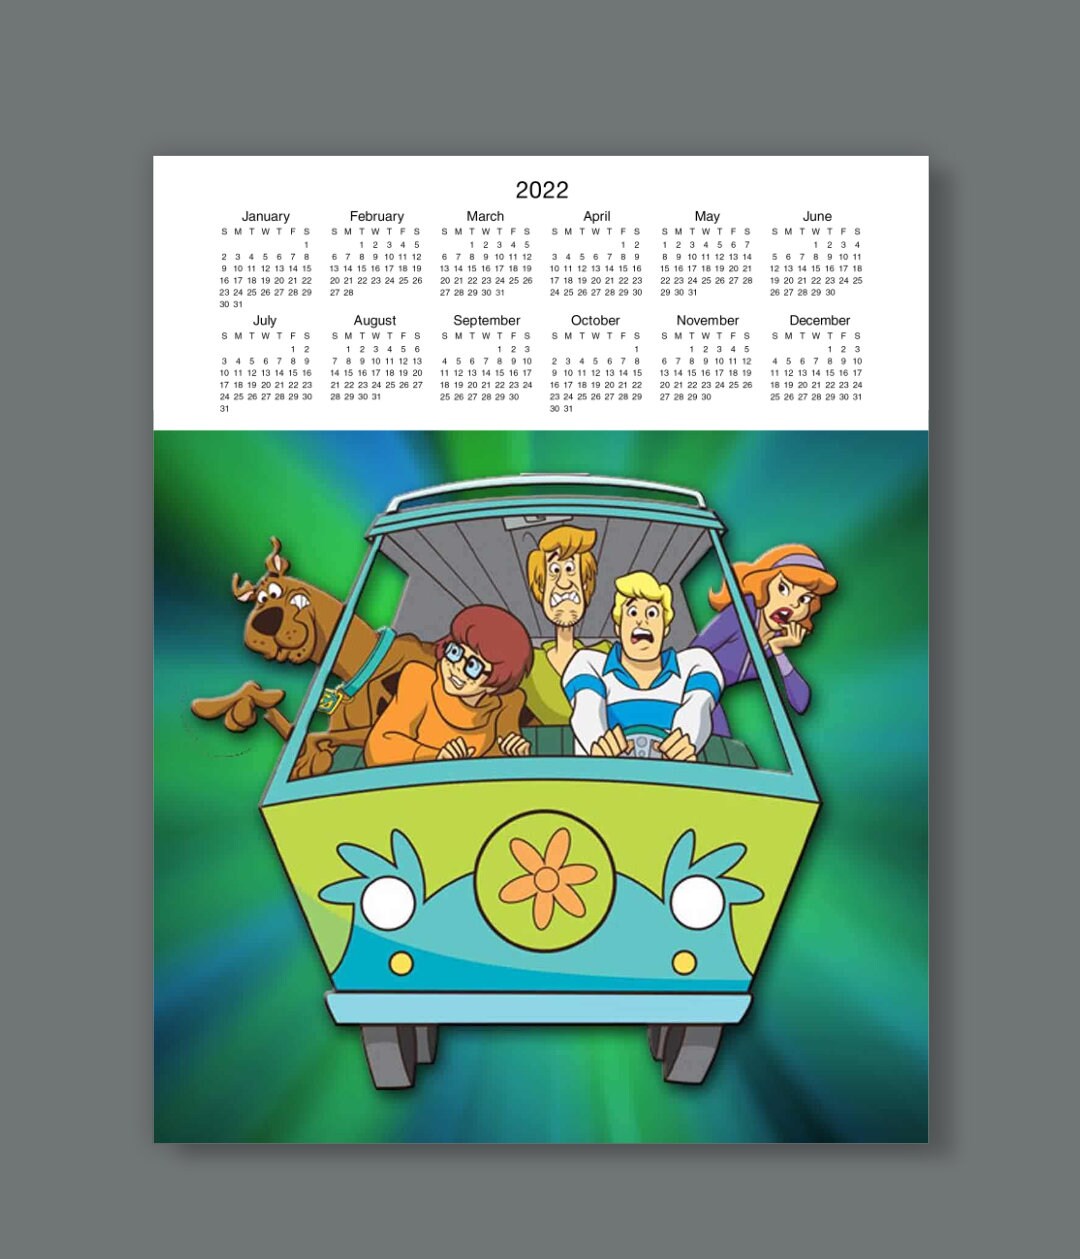 2022-scooby-doo-and-the-gang-calender-poster-11x14-etsy